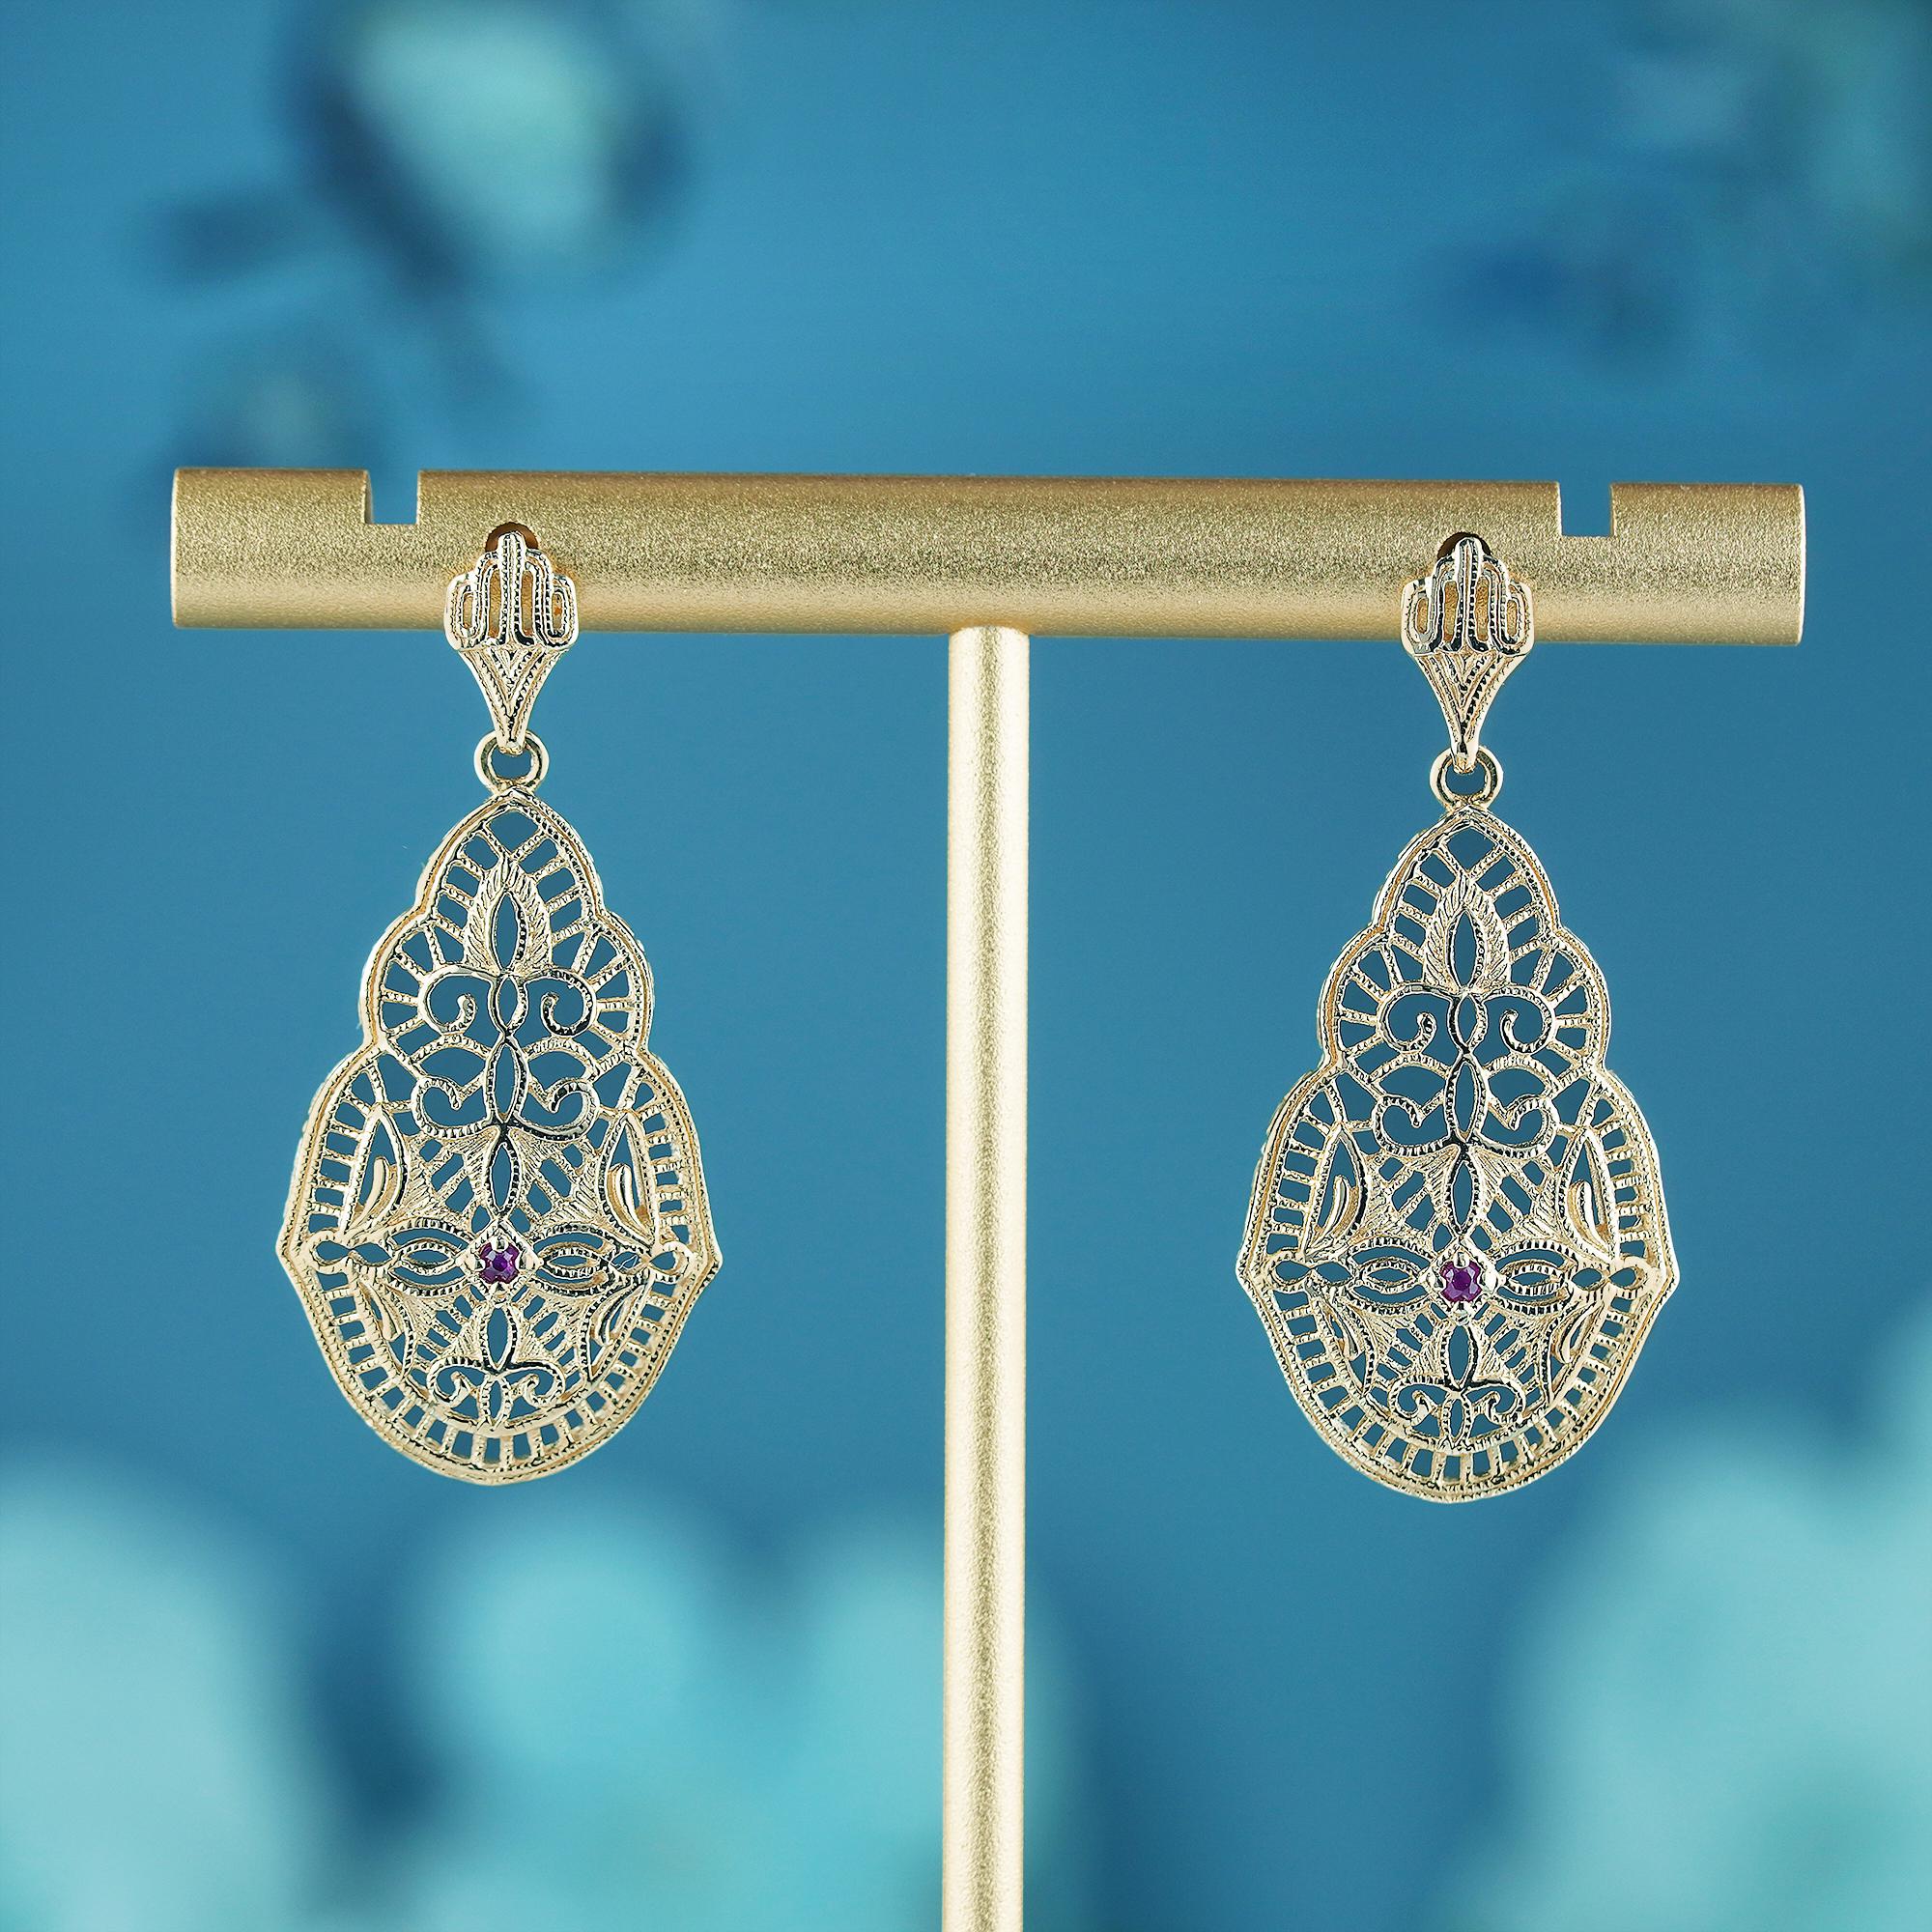 Add a delicate and unique aesthetic to your look with these filigree earrings by GEMMA FILIGREE. Our antique design gold filigree earrings equate to delicacy and light openwork, while maintains strength for everyday wear for a lifetime.

The earring